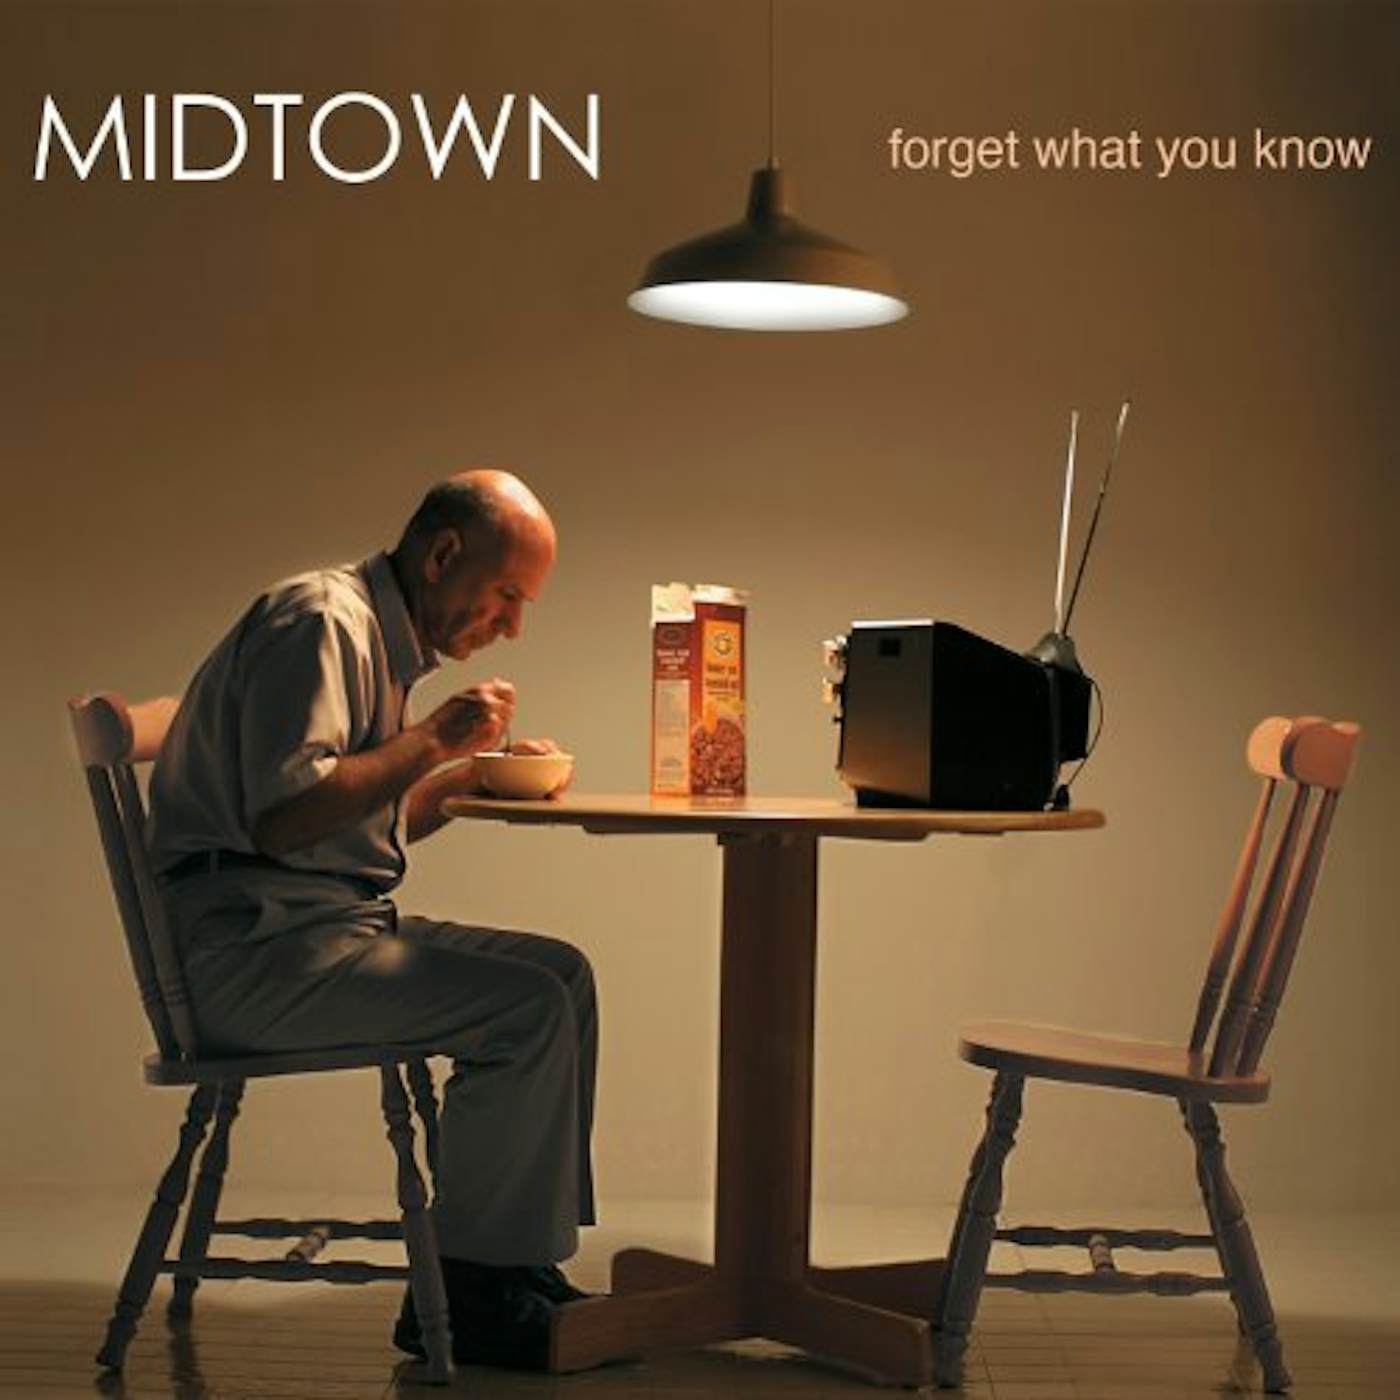 Midtown Forget What You Know Vinyl Record